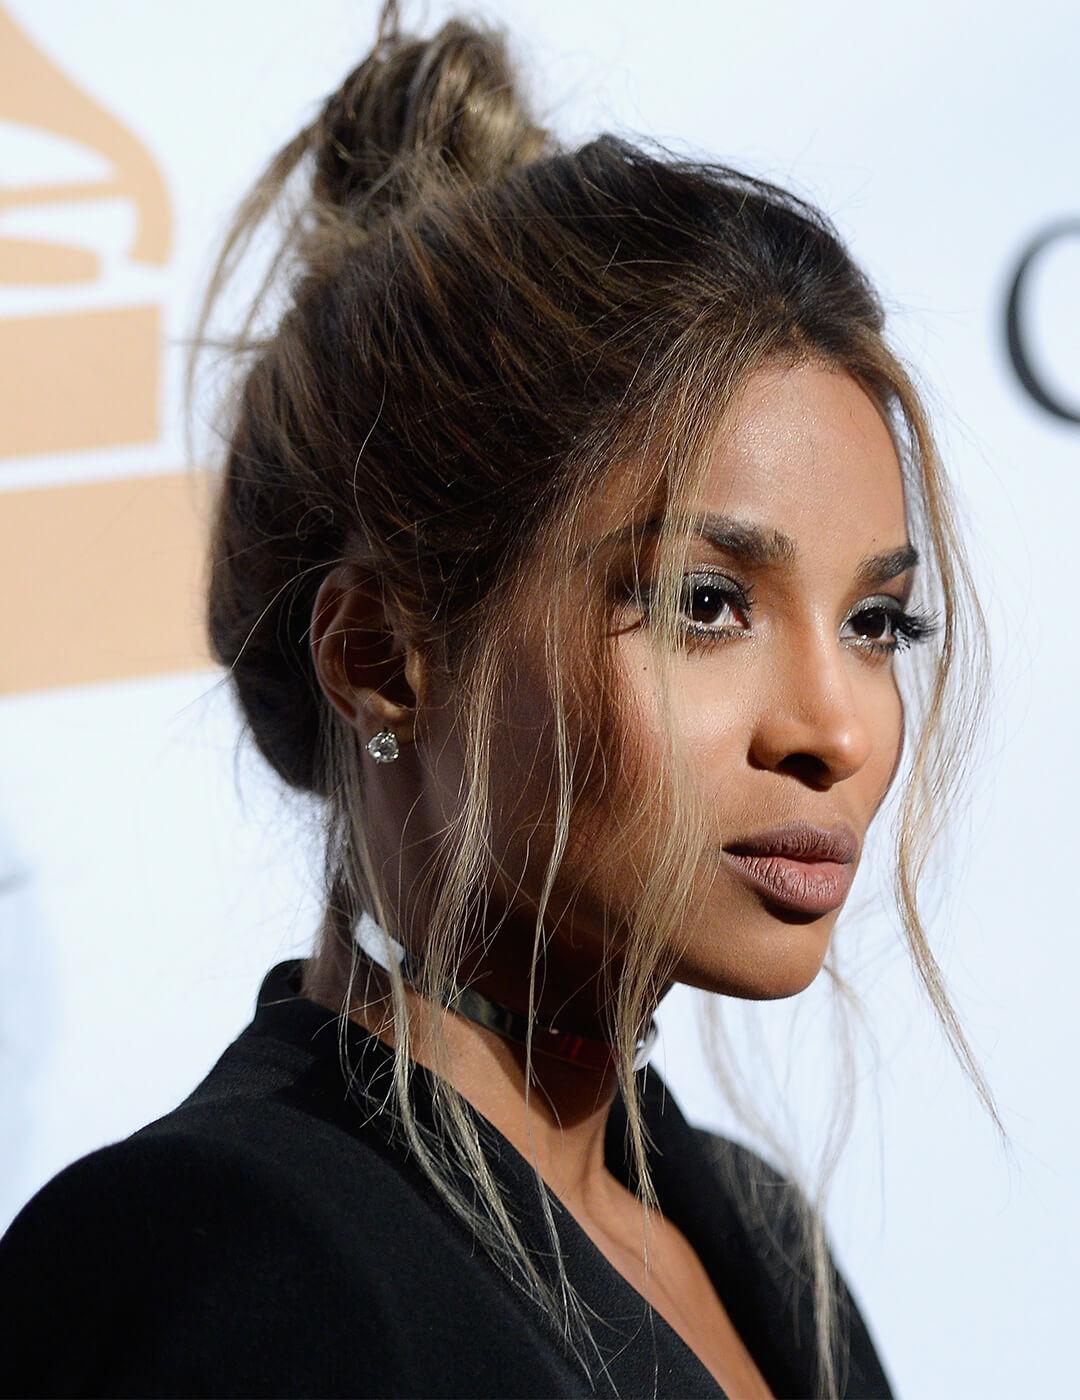 Close-up image of Ciara with an up-do hairstyle and loose bangs